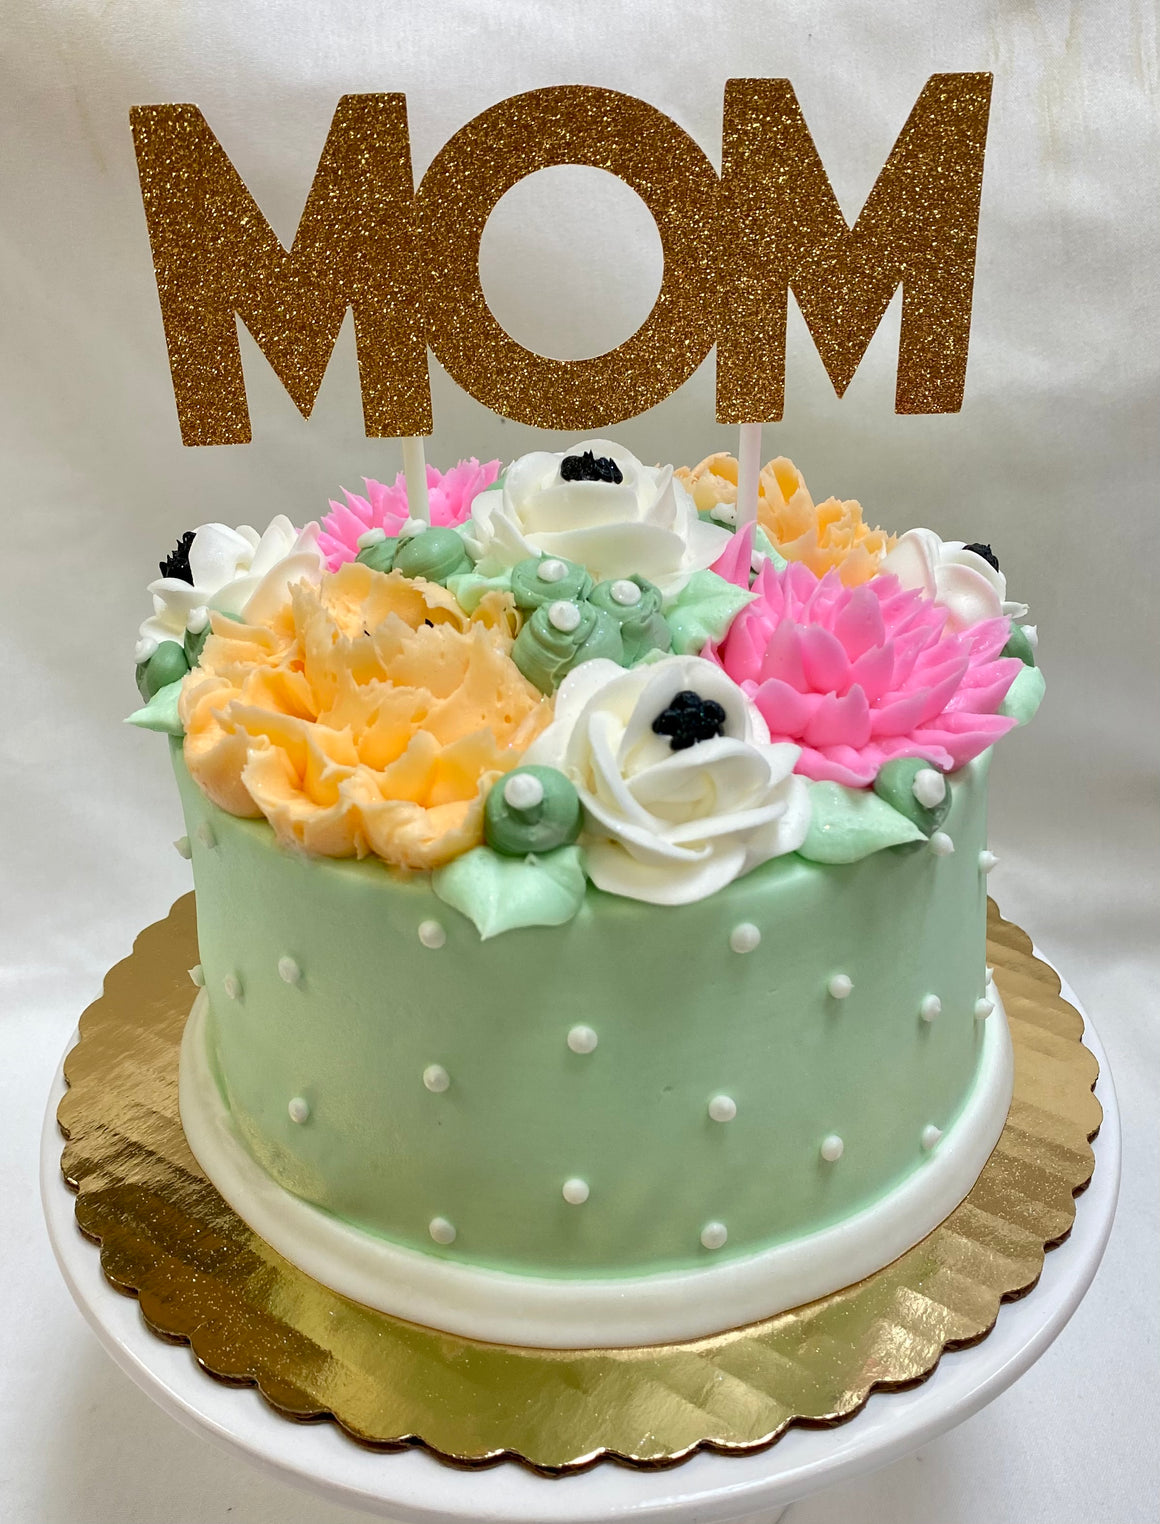 Decorated Mother's Day Cake - 6" - "Ann Marie Theme"